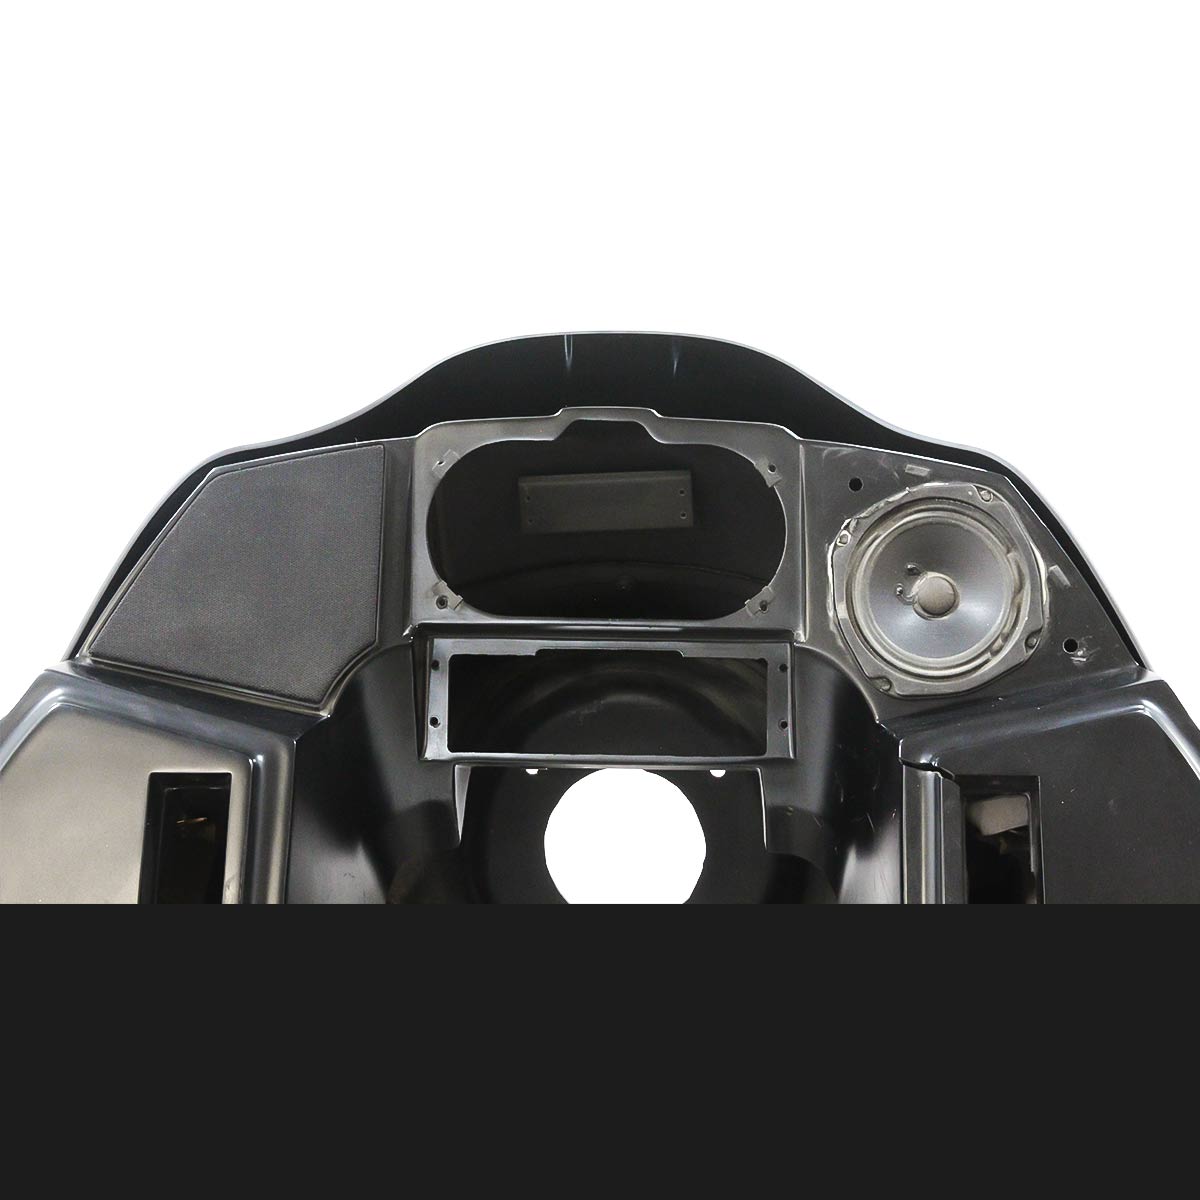 8" Solid Black Flare™ Windshield for Harley-Davidson motorcycles models with FXRP, FXRT, FXRD Style Fairings(8" Solid Black)